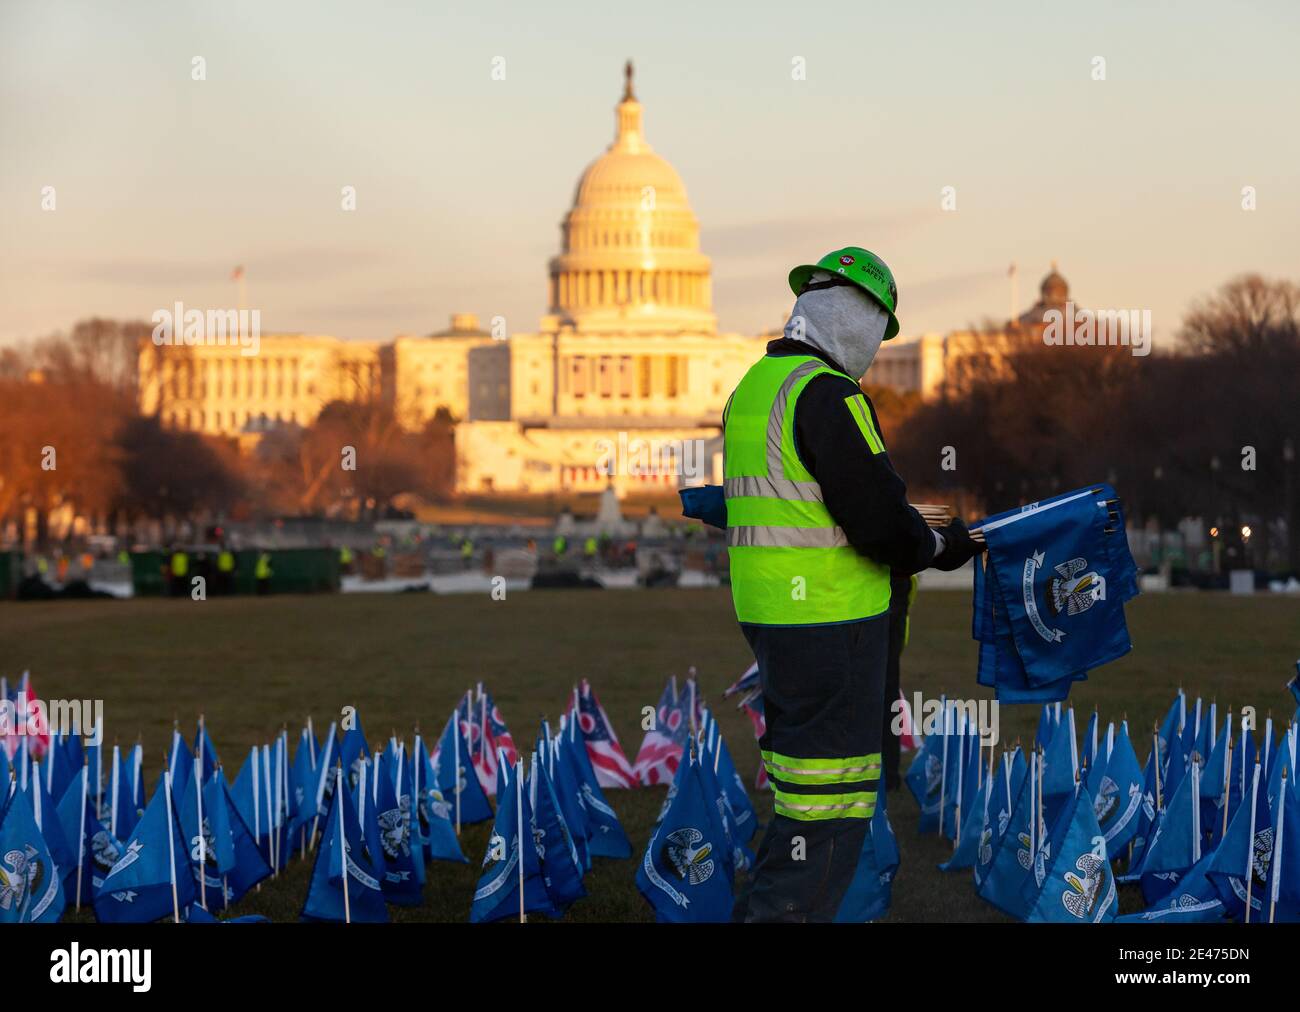 Washington, DC, USA, 21 January, 2021.  Pictured:  A worker clears the last of the flags from the Field of Flags on the National Mall, in front of the Capitol.  The day after a presidential inauguration mostly restores normaility to Washington.  Most of the extra security measures were gone and most roads had reopened by morning.  Credit: Allison C Bailey/Alamy Live News Stock Photo